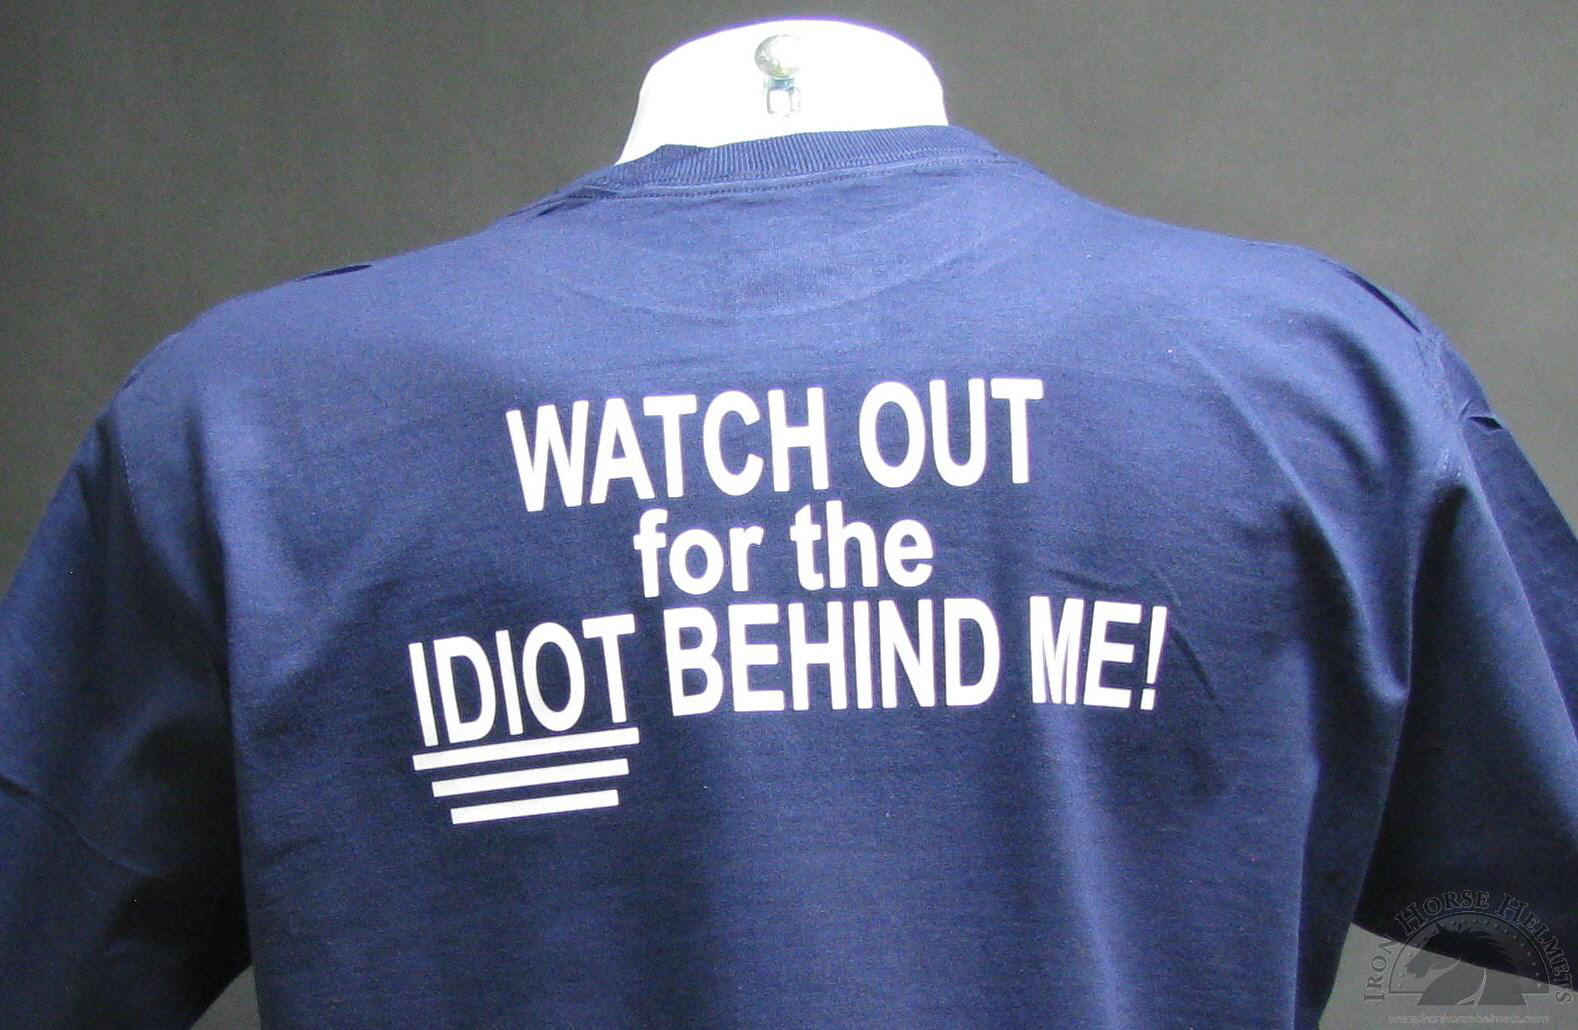 watch-out-for-the-idiot-behind-me-shirt.jpg